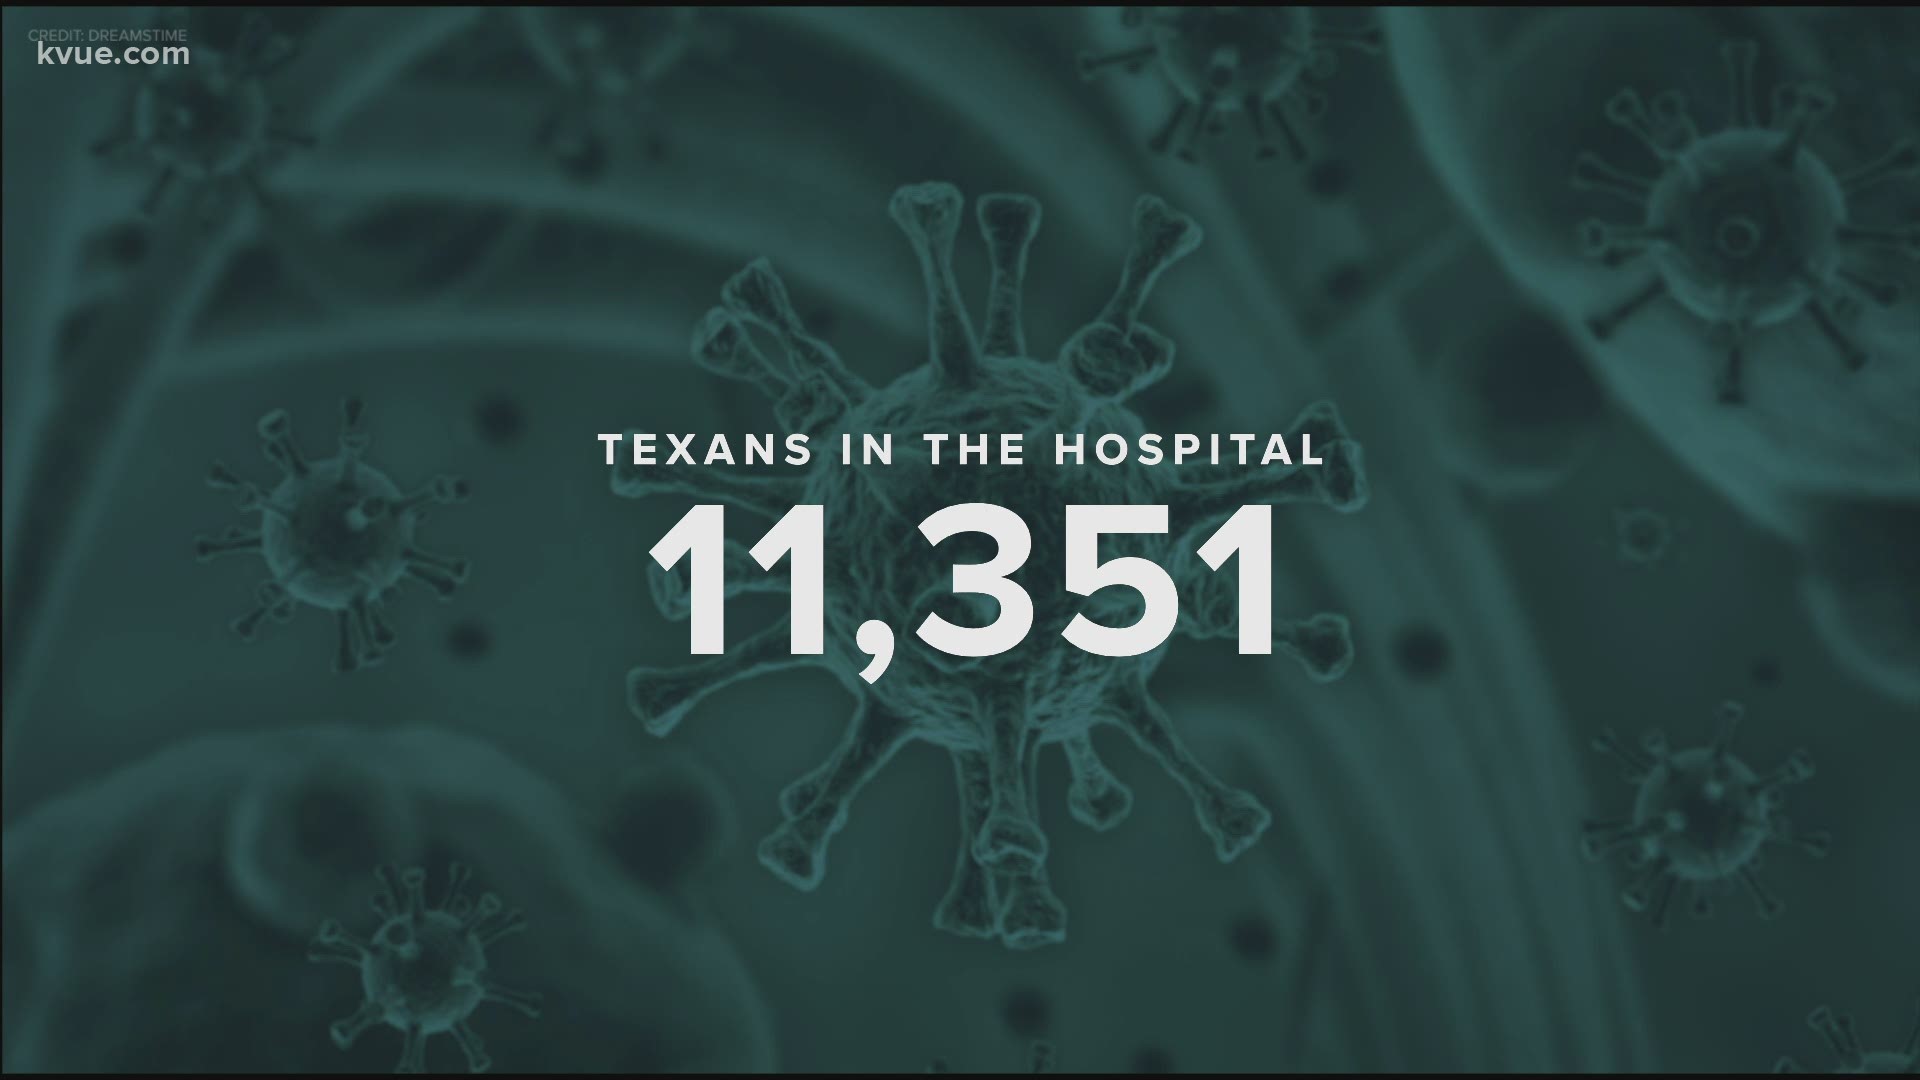 The number of Texans hospitalized with COVID-19 has reached a record high. The number has surpassed the levels seen during a spike this summer.